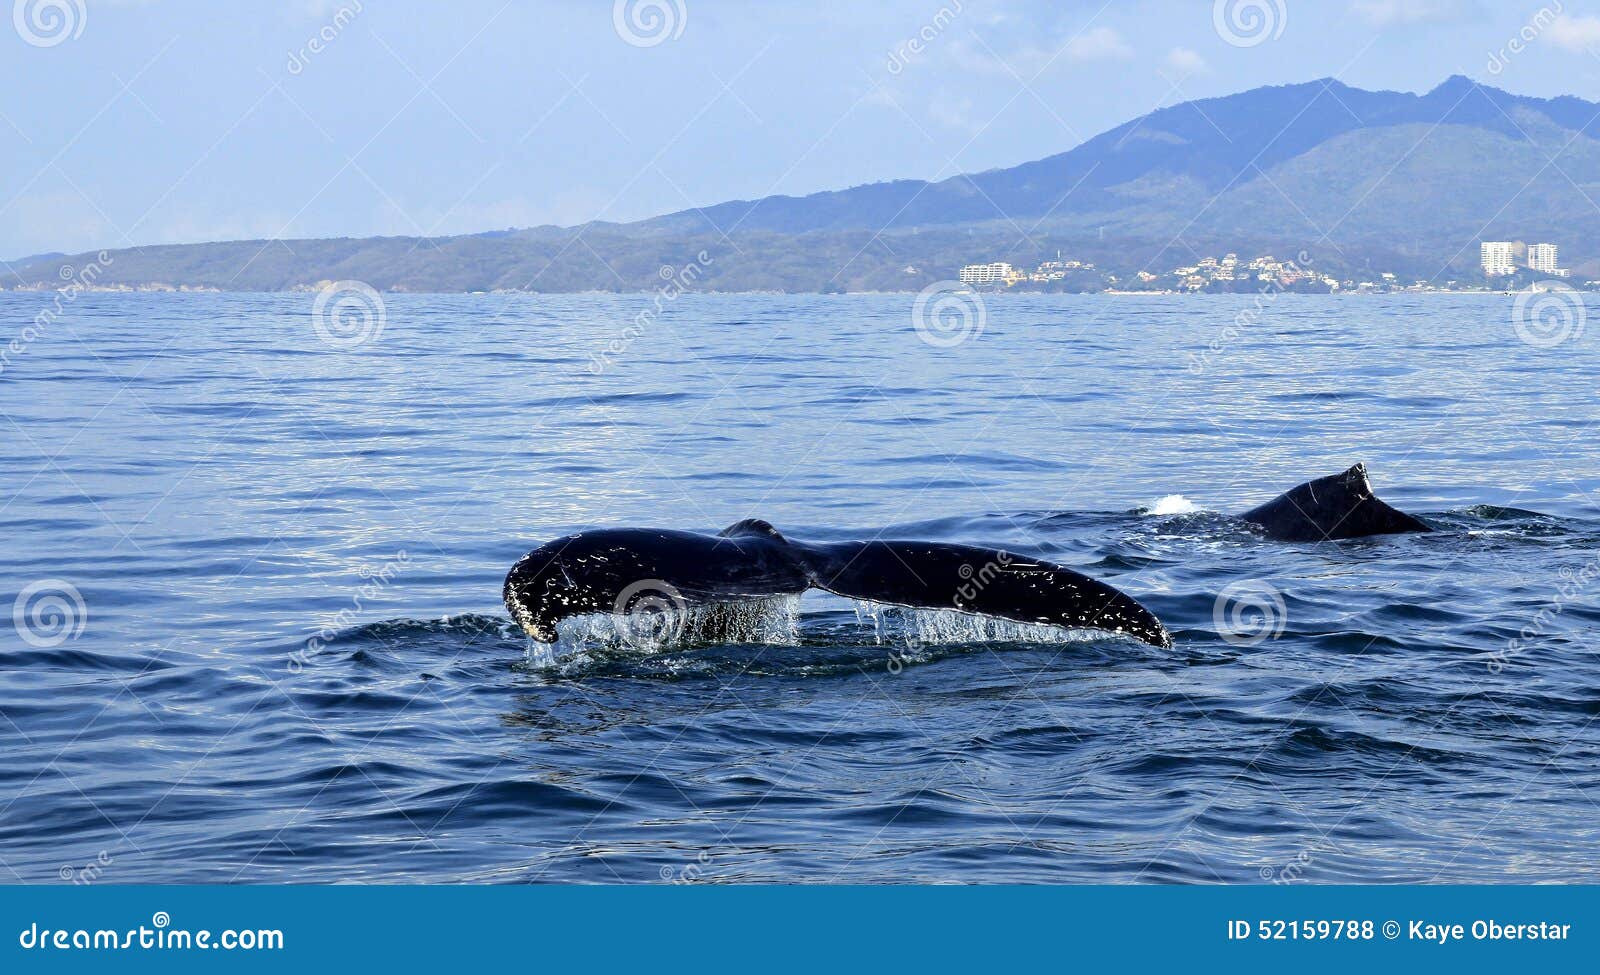 Whale Watching in Puerto Vallarta Stock Photo - Image of acrobatic